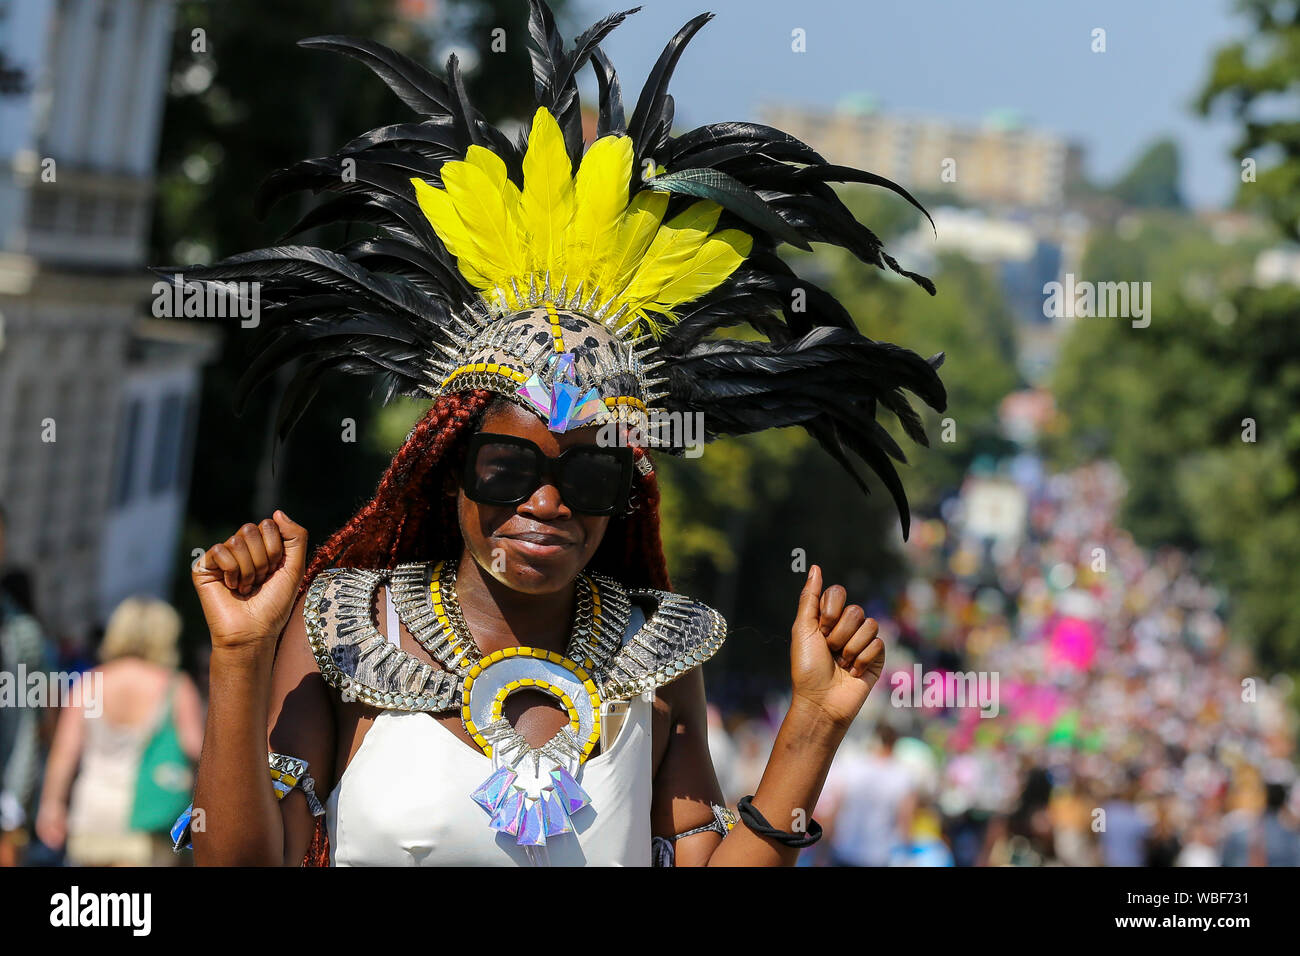 A dancer in a colourful headrest during the 2019 Notting Hill Carnival, Europe's largest street party and a celebration of Caribbean traditions and the capital's cultural diversity. Stock Photo